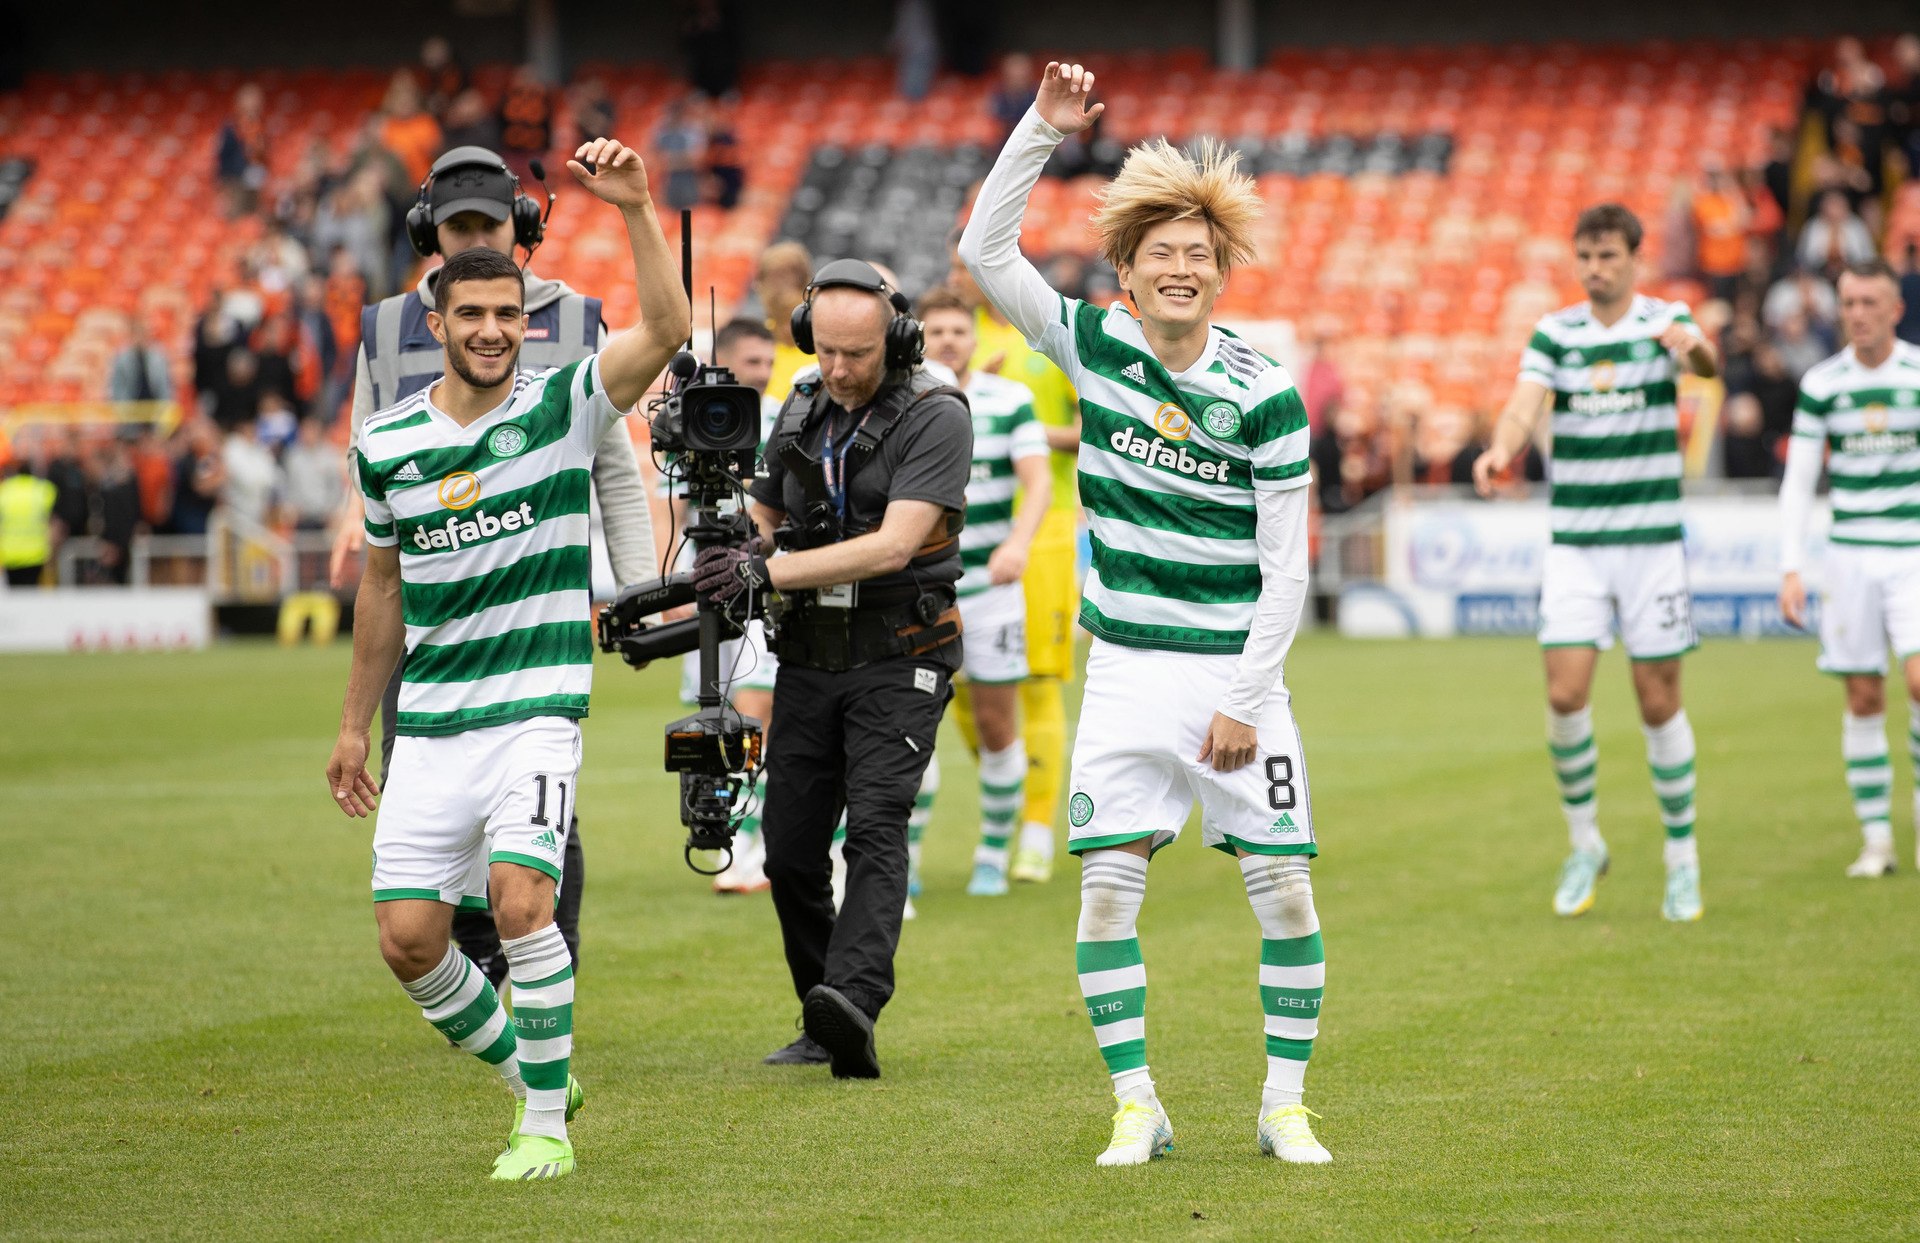 Celtic scored nine goals against Dundee United as they made a strong start to the league season. (Photo by Craig Williamson / SNS Group)